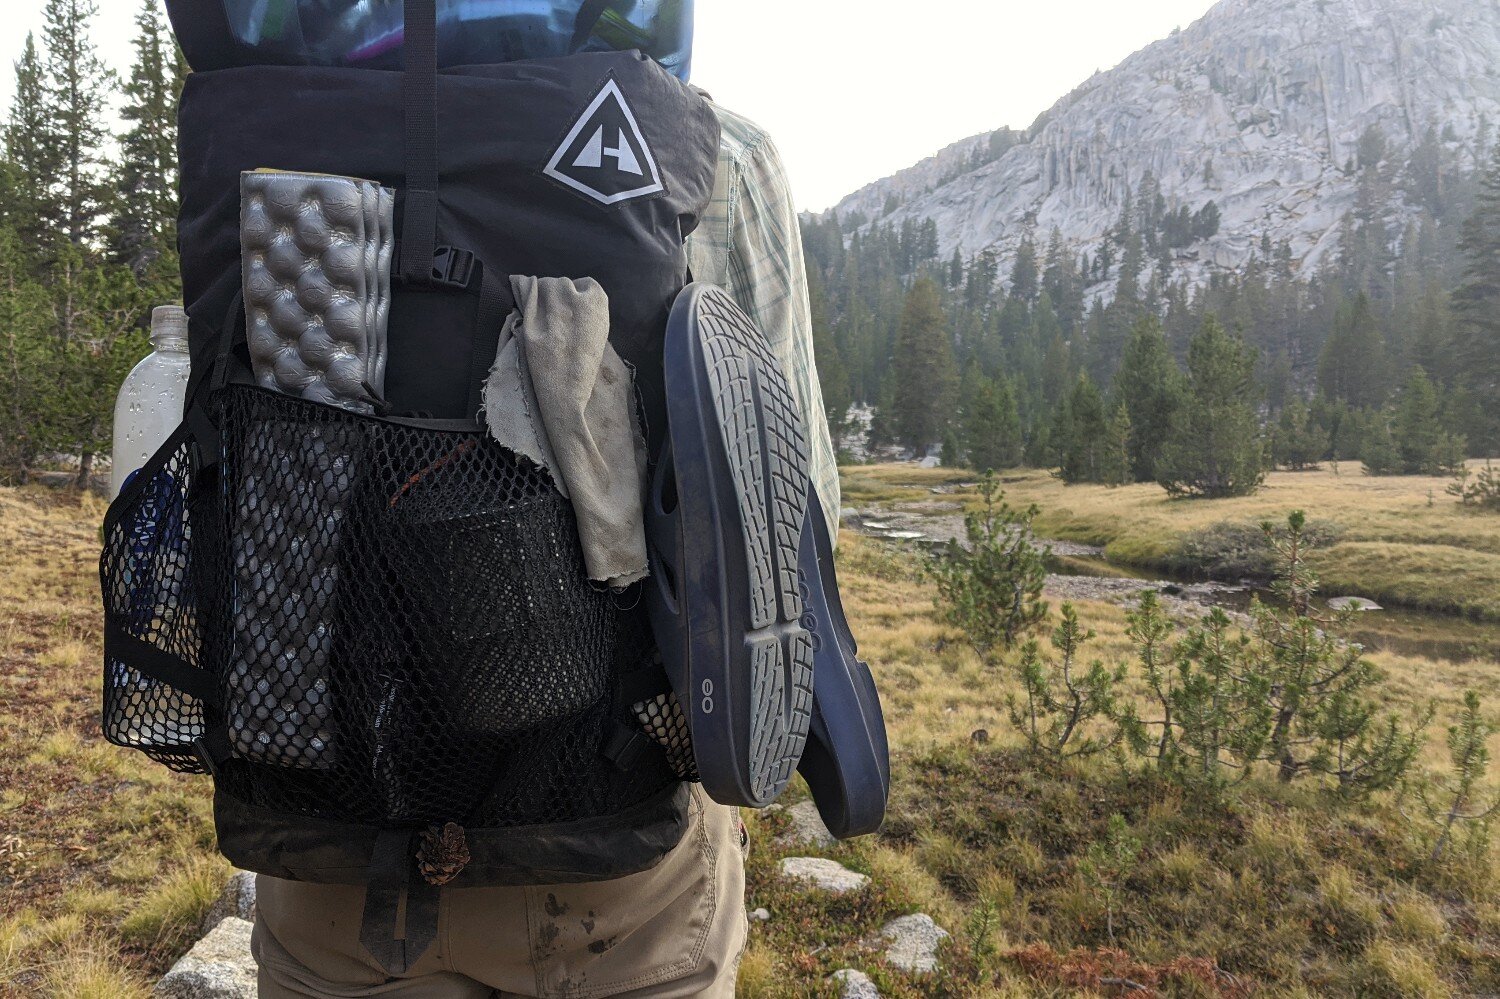 Packing along the BUDGET-FRIENDLY OOFOS OOriginals for a backpacking trip in the Sierras.